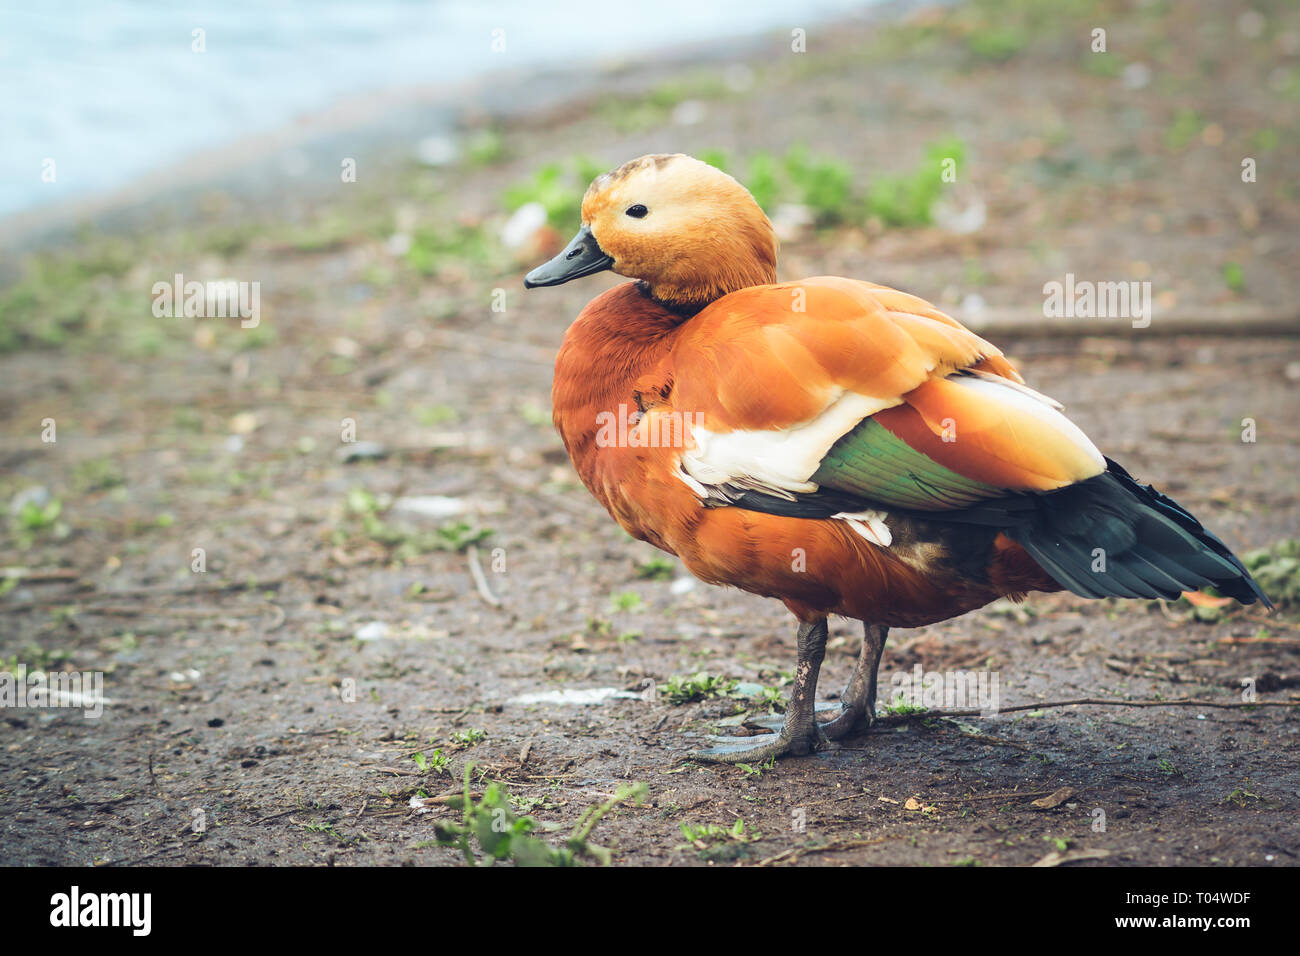 A side-view of a male ruddy shelduck or Brahminy duck.  Showing its red brown plumage, green speculum feathers, white wing coverts and flat black beak Stock Photo